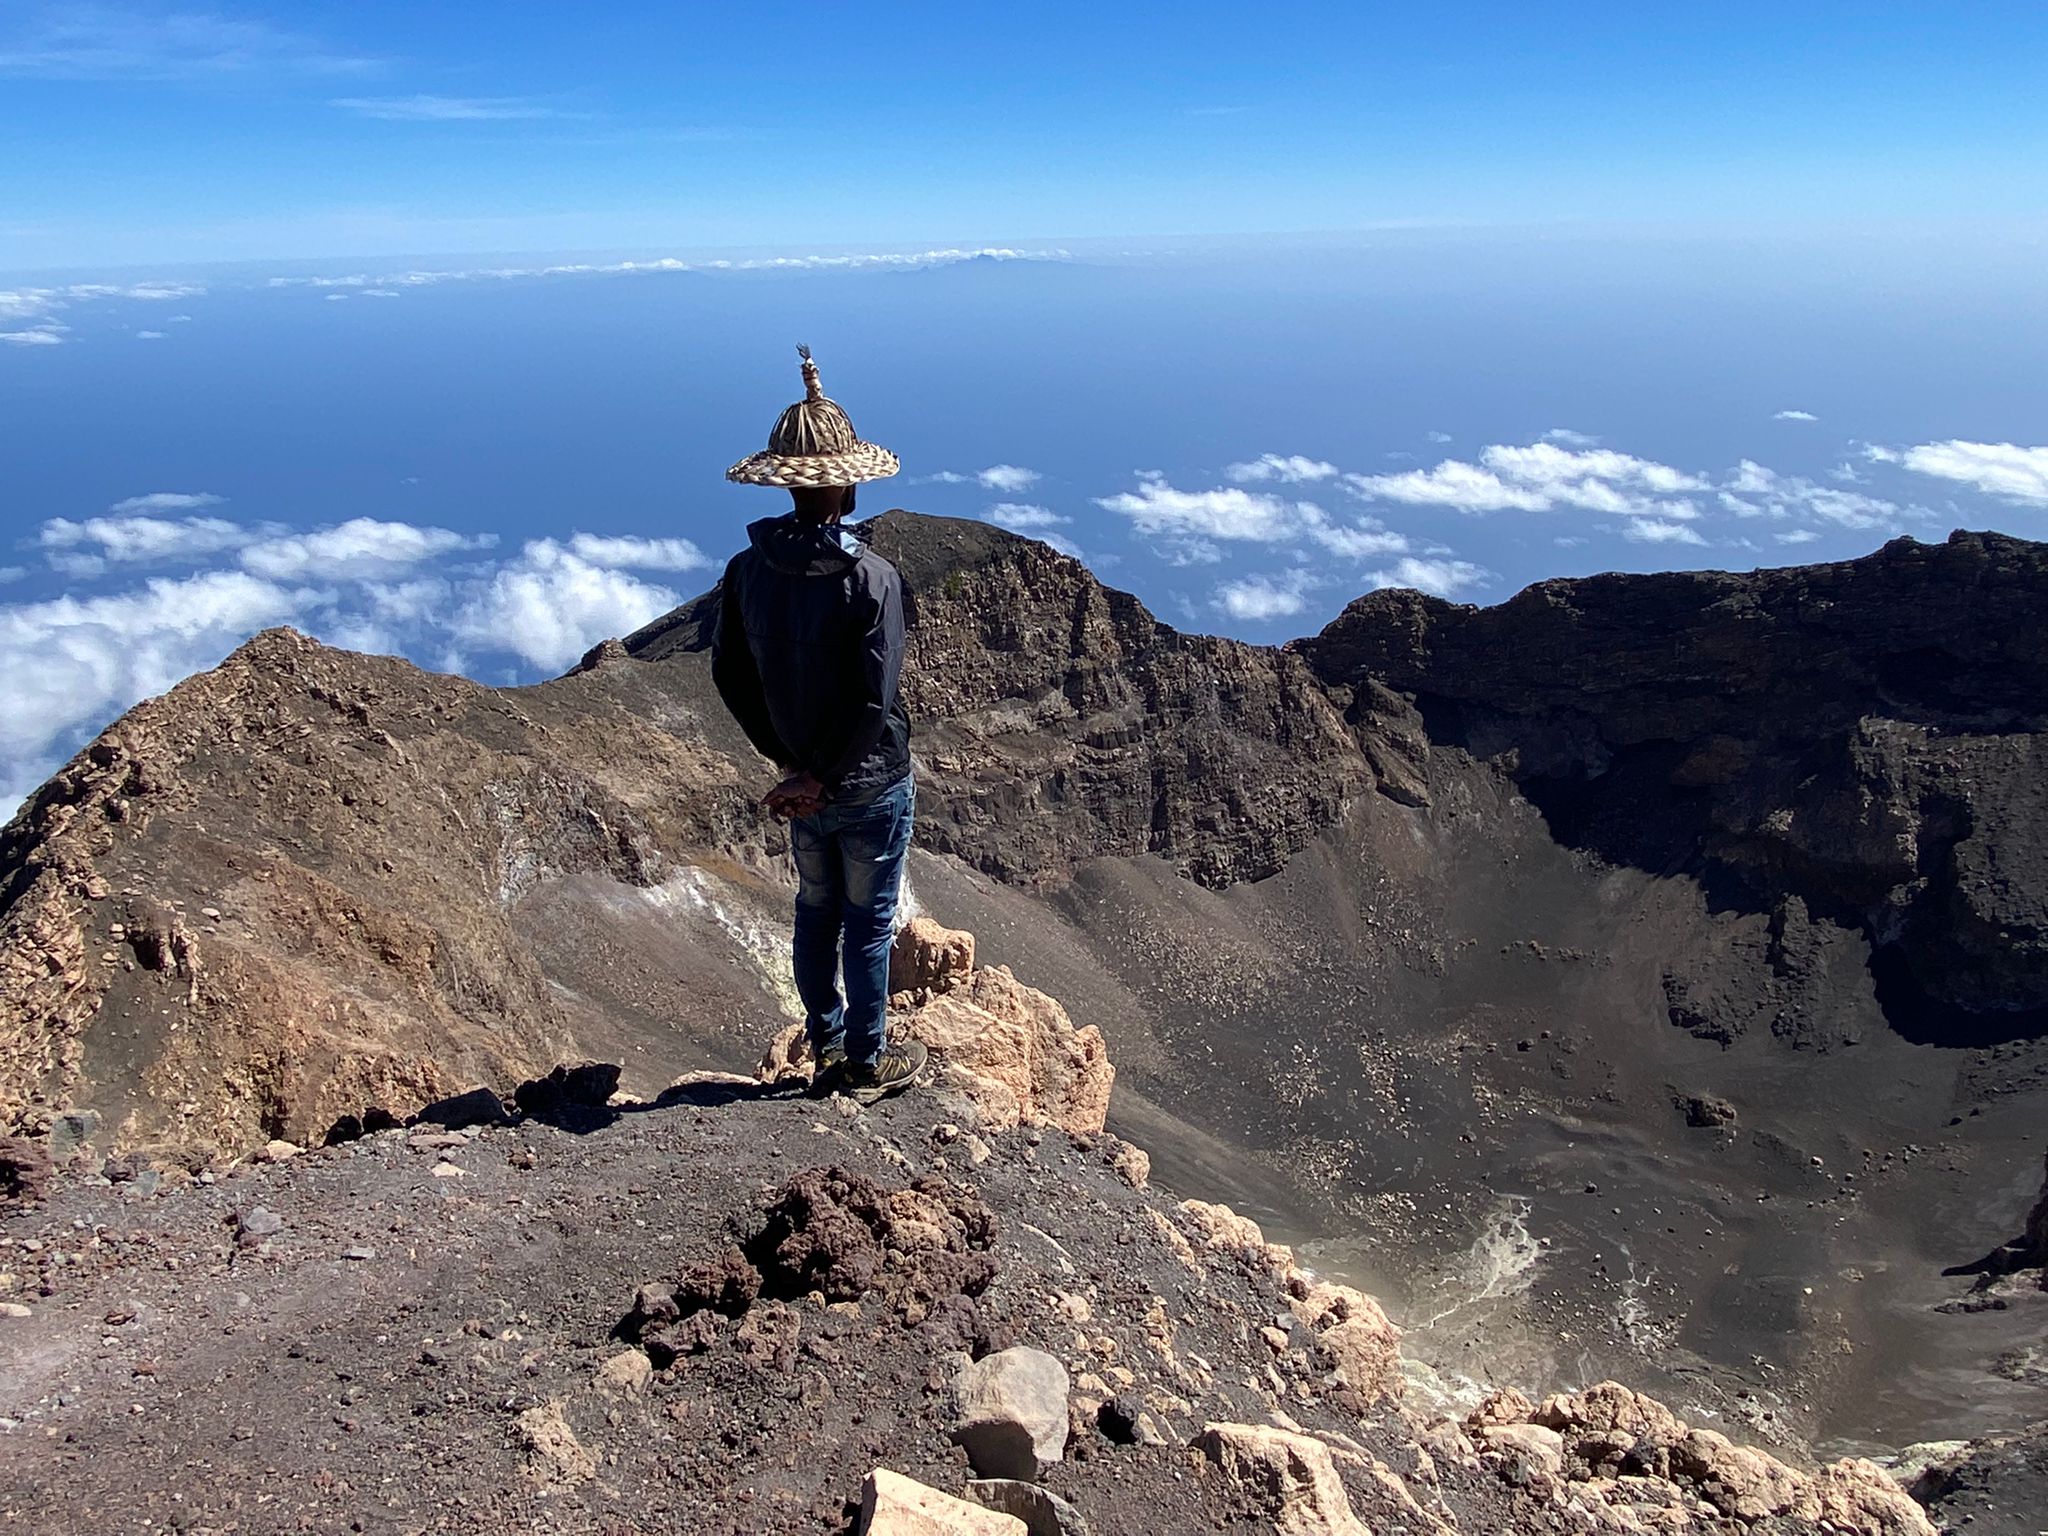 A mountain guide looks out across the caldera of Pico do Fogo, in Cape Verde